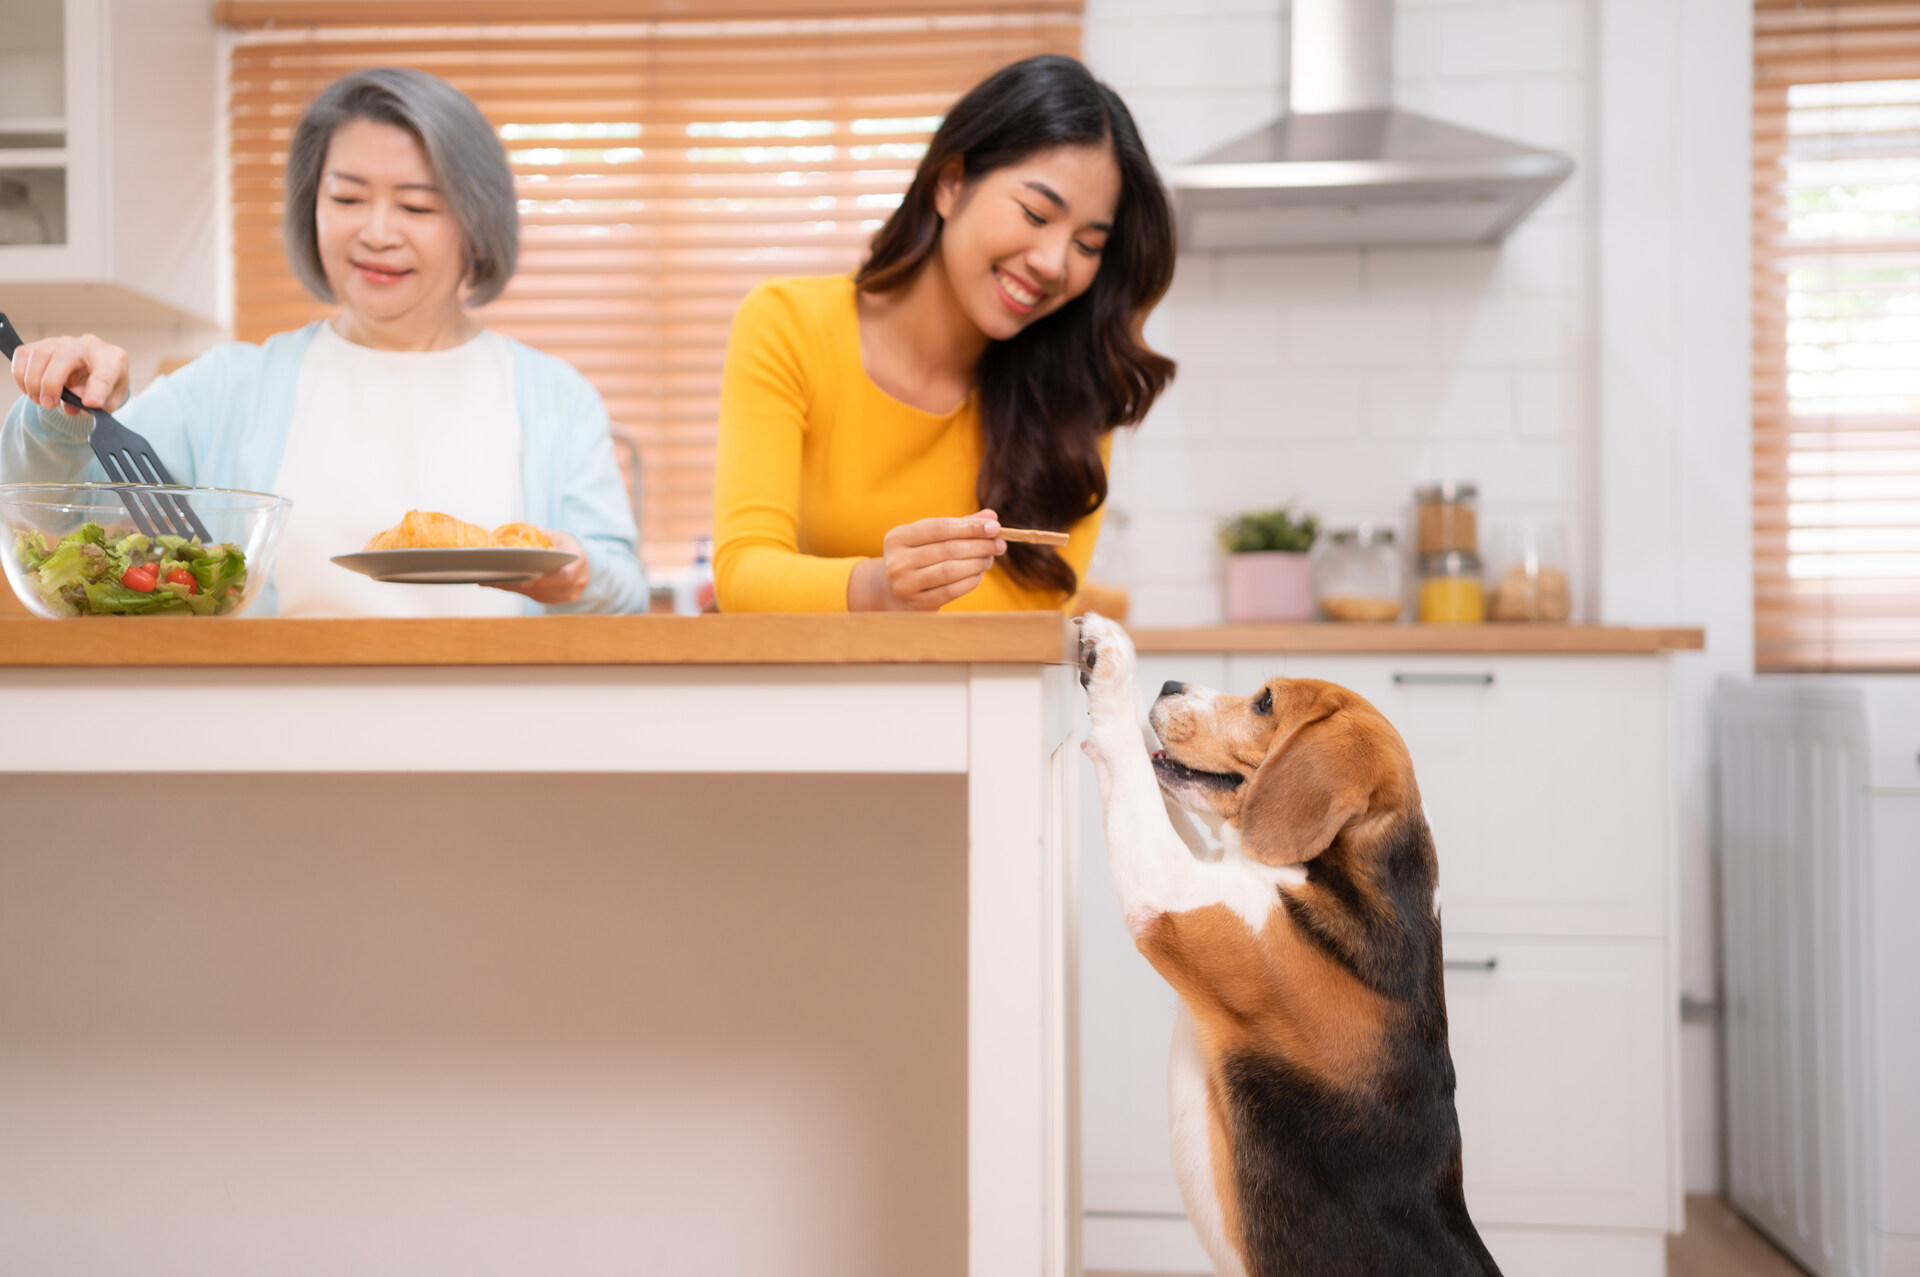 A woman distracting a dog from food in a kitchen